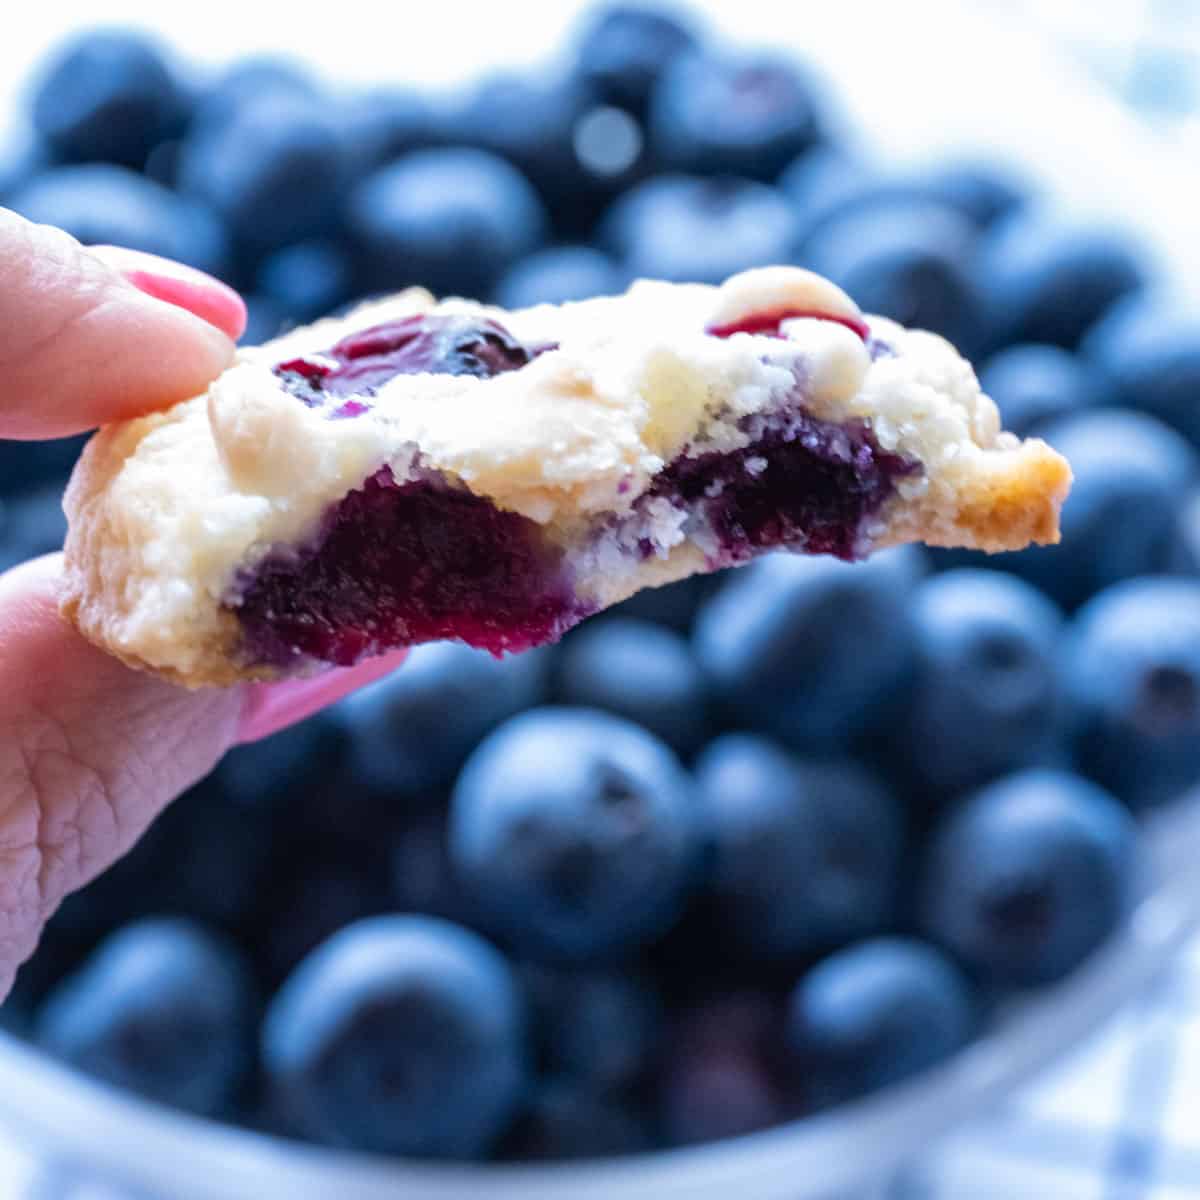 Upclose image of a handheld blueberry cookie with a bite taken out of it and a bowl of blueberries in the background.